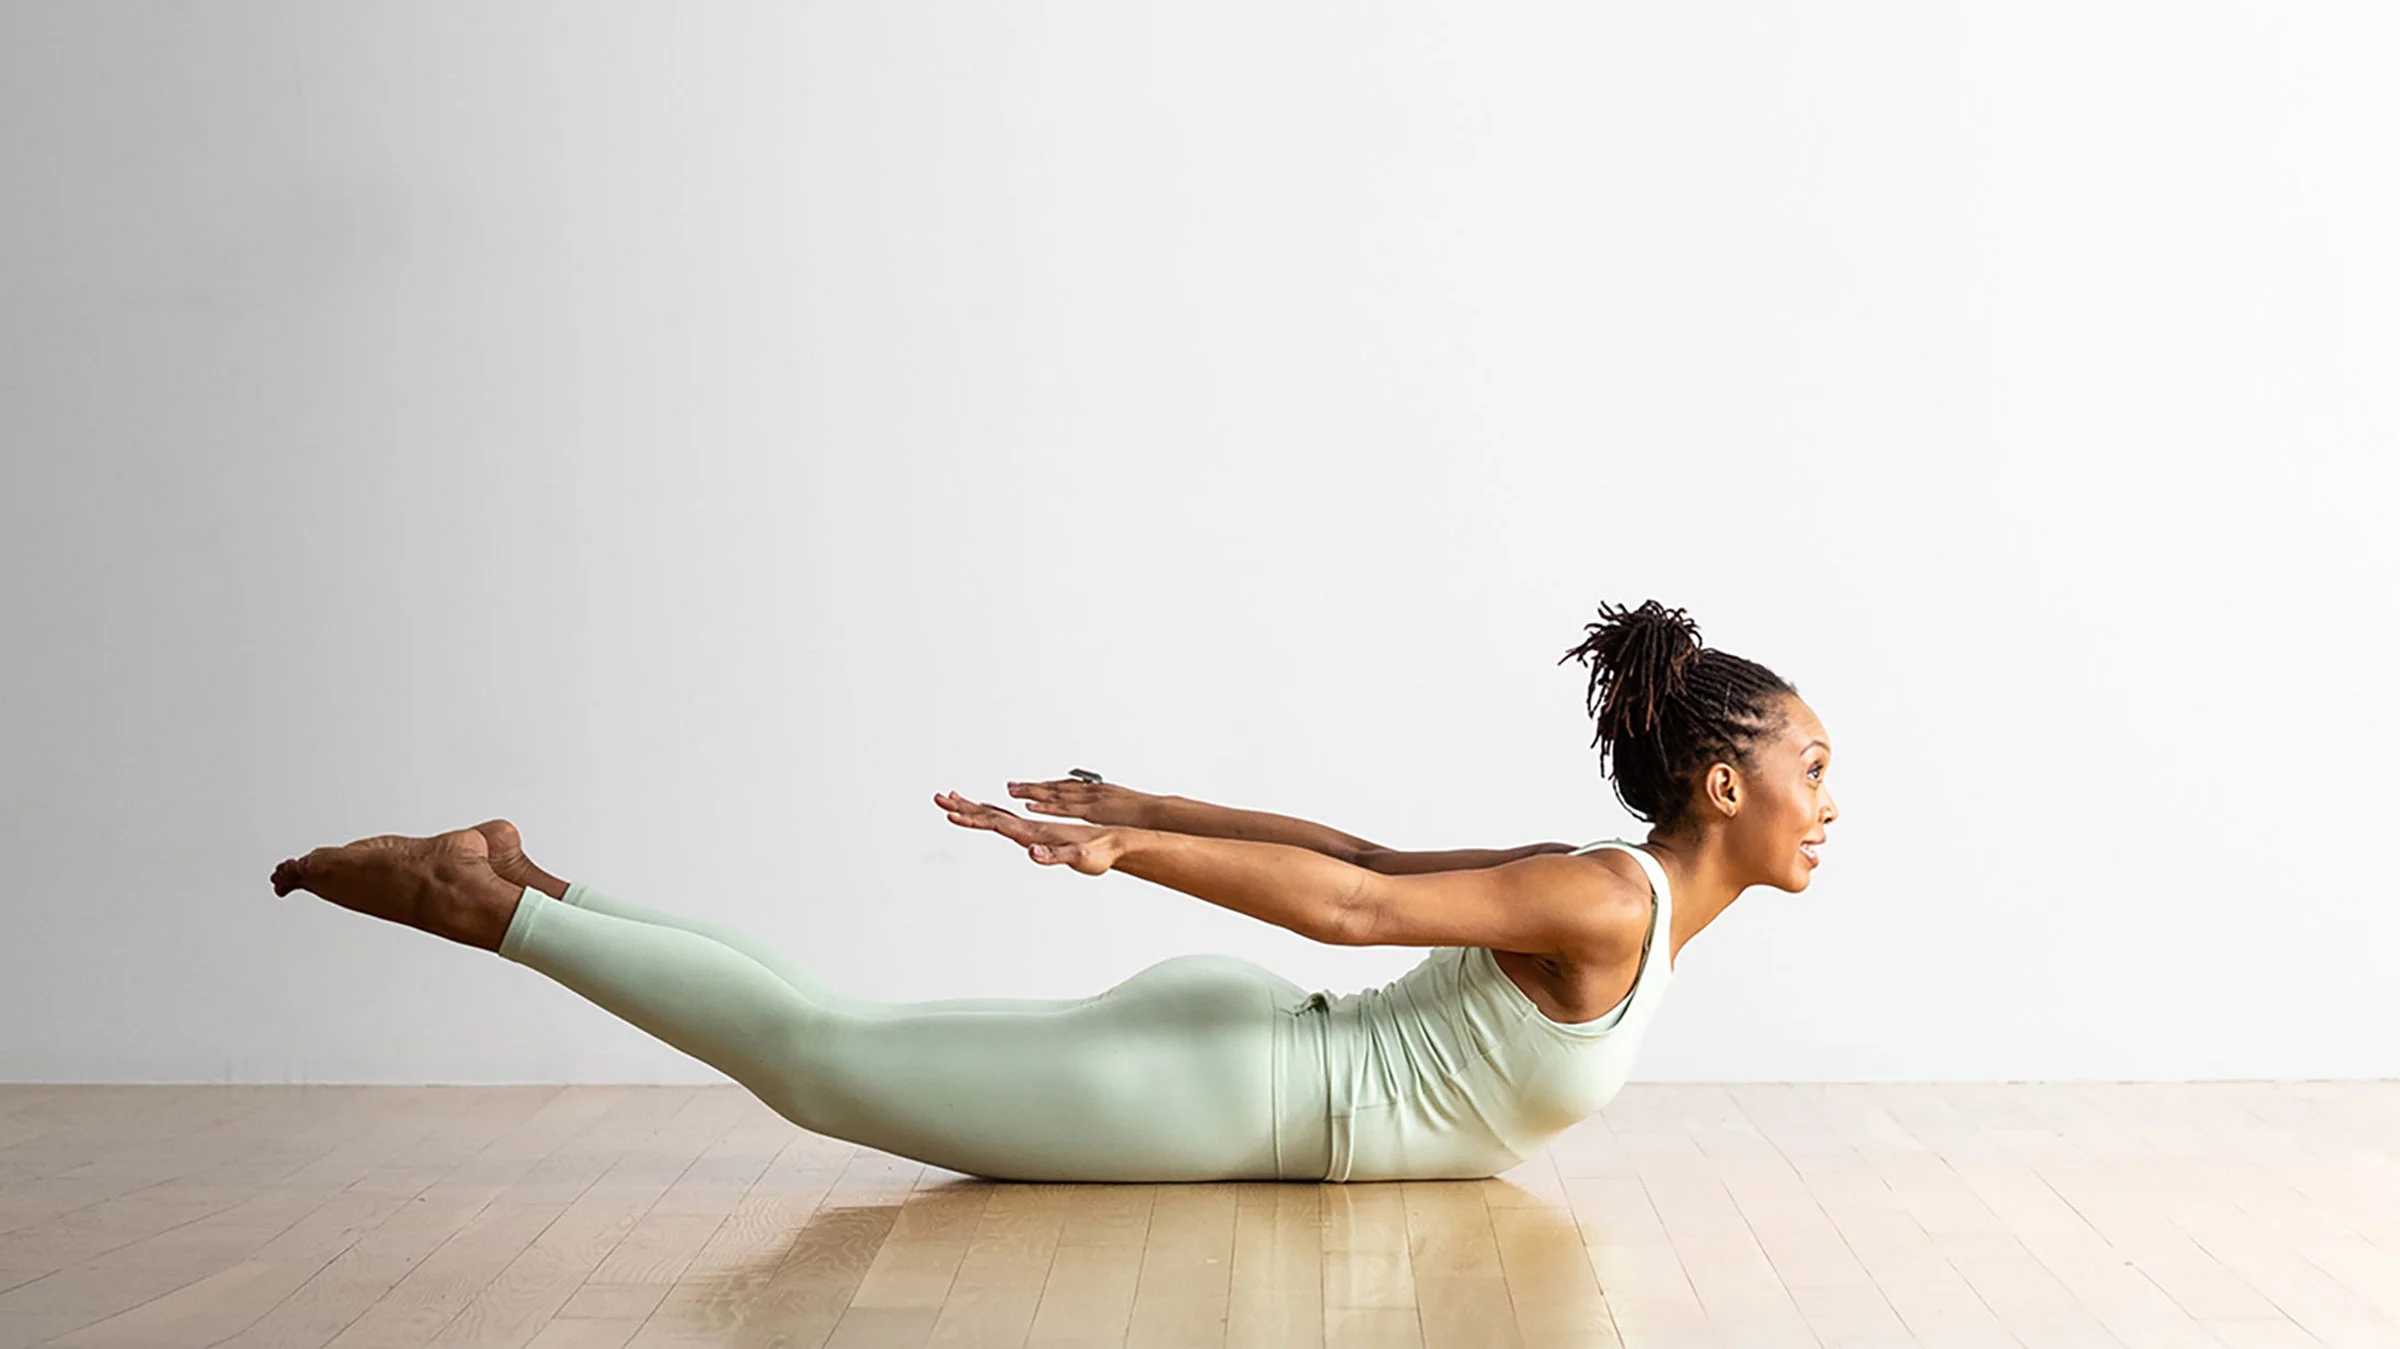 The Best Yoga Poses for Beginners Everyone Should Practice